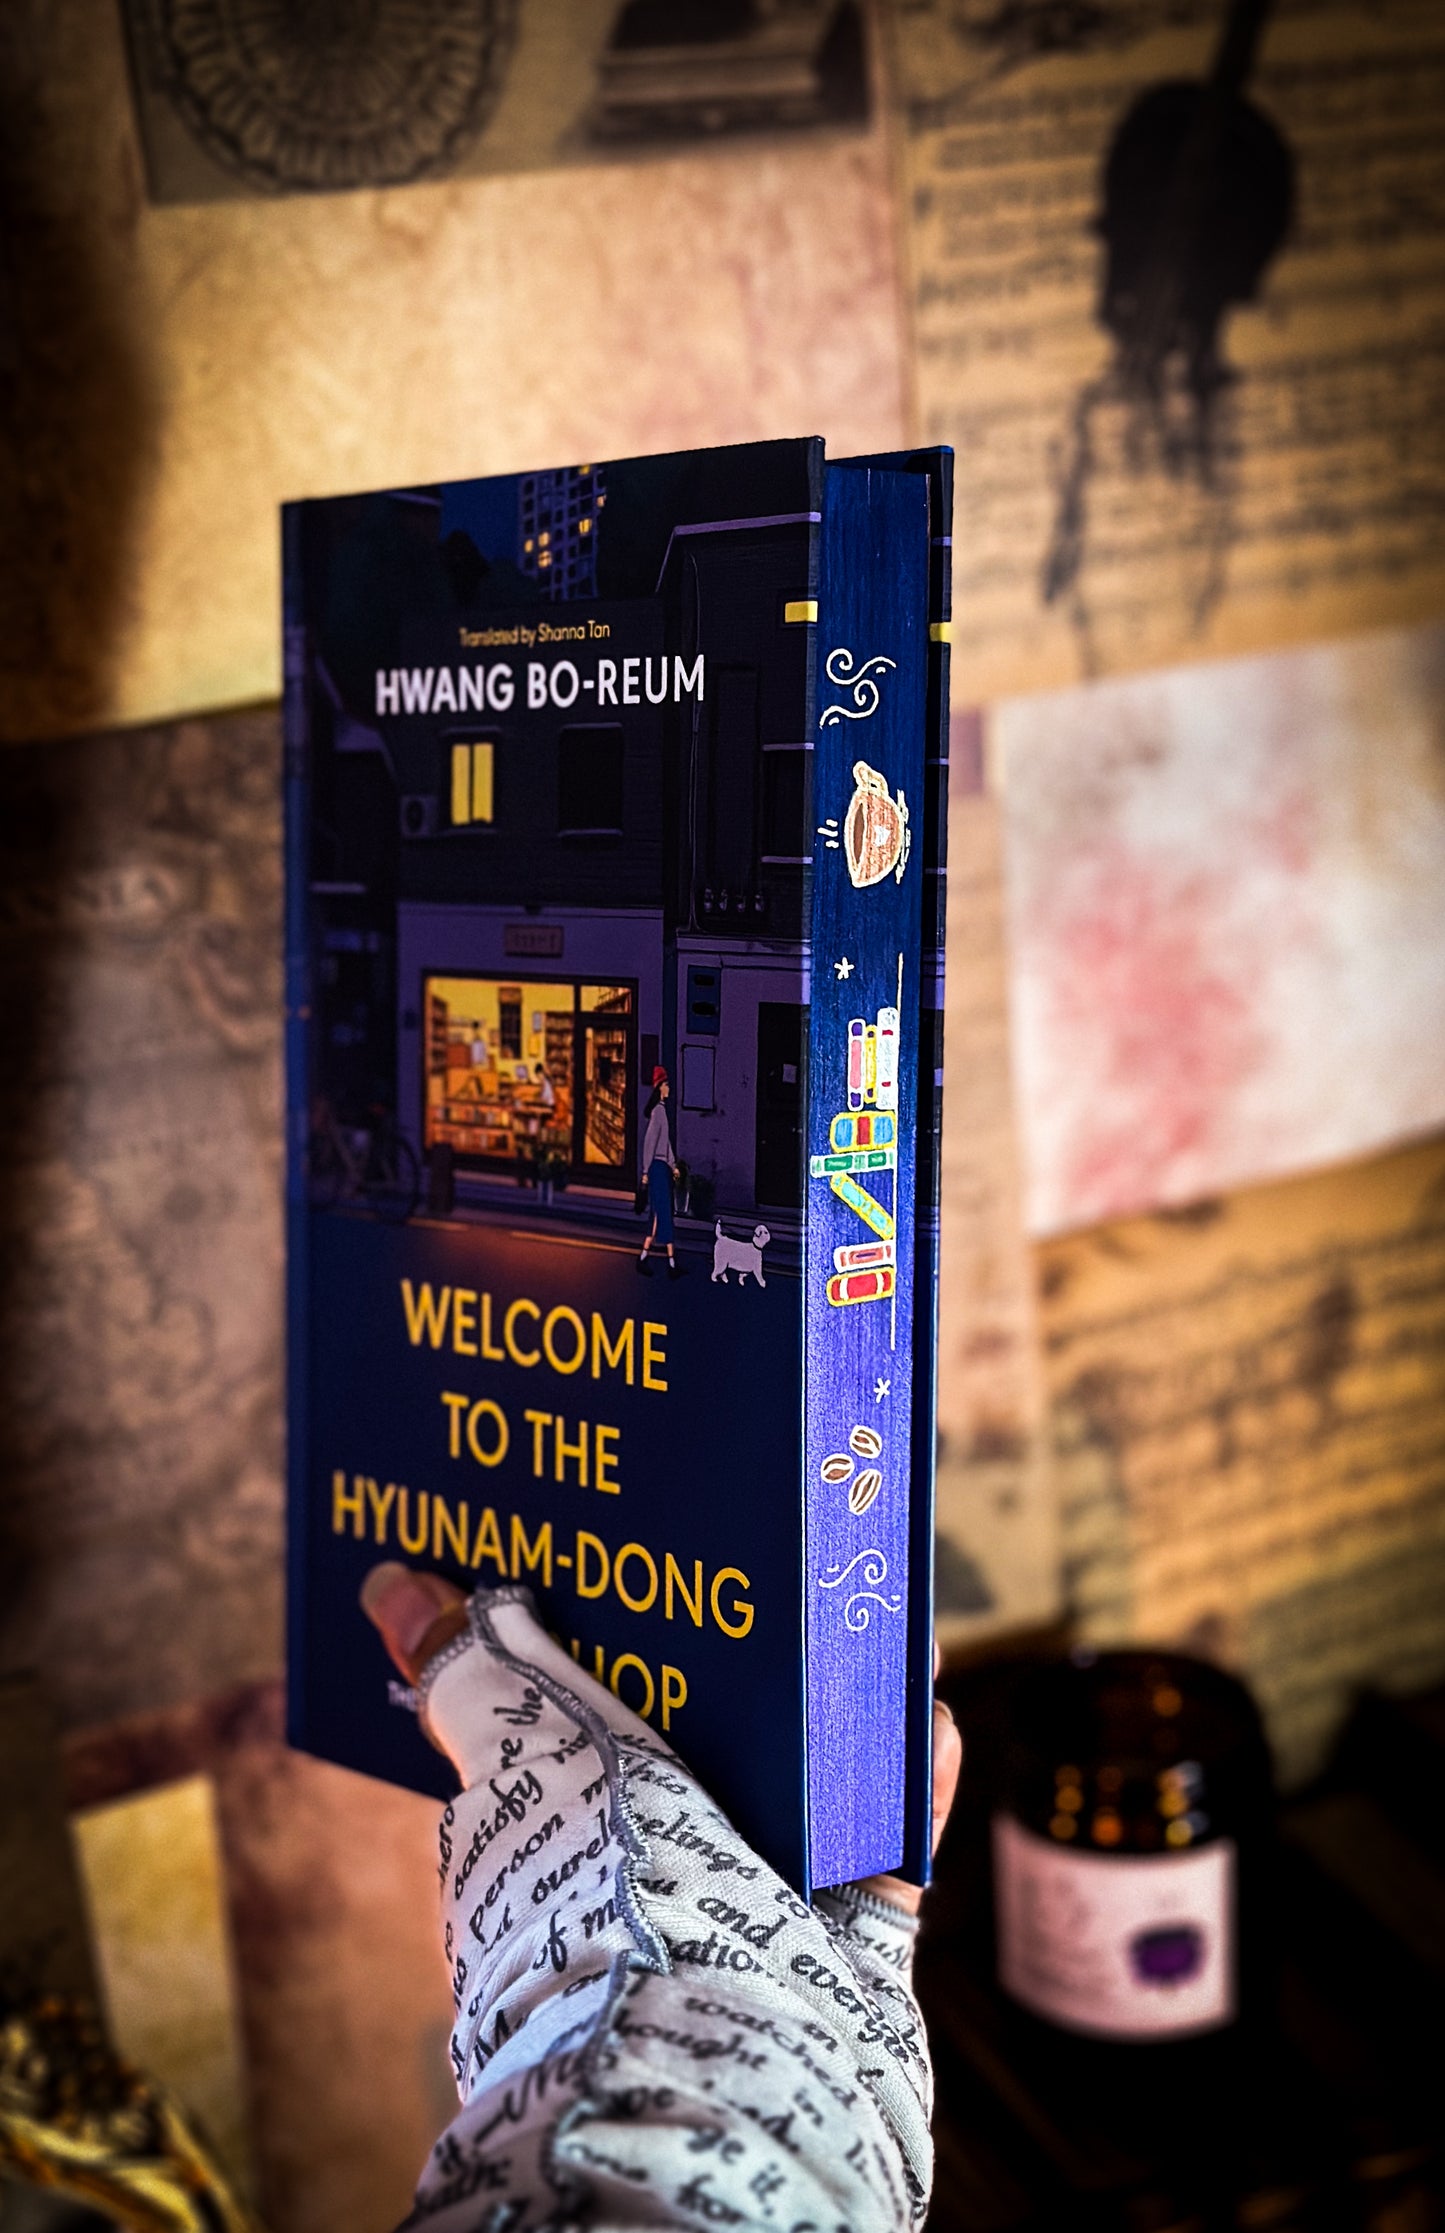 Welcome to the Hyunam-dong Bookshop HANDPAINTED BOOK EDGES